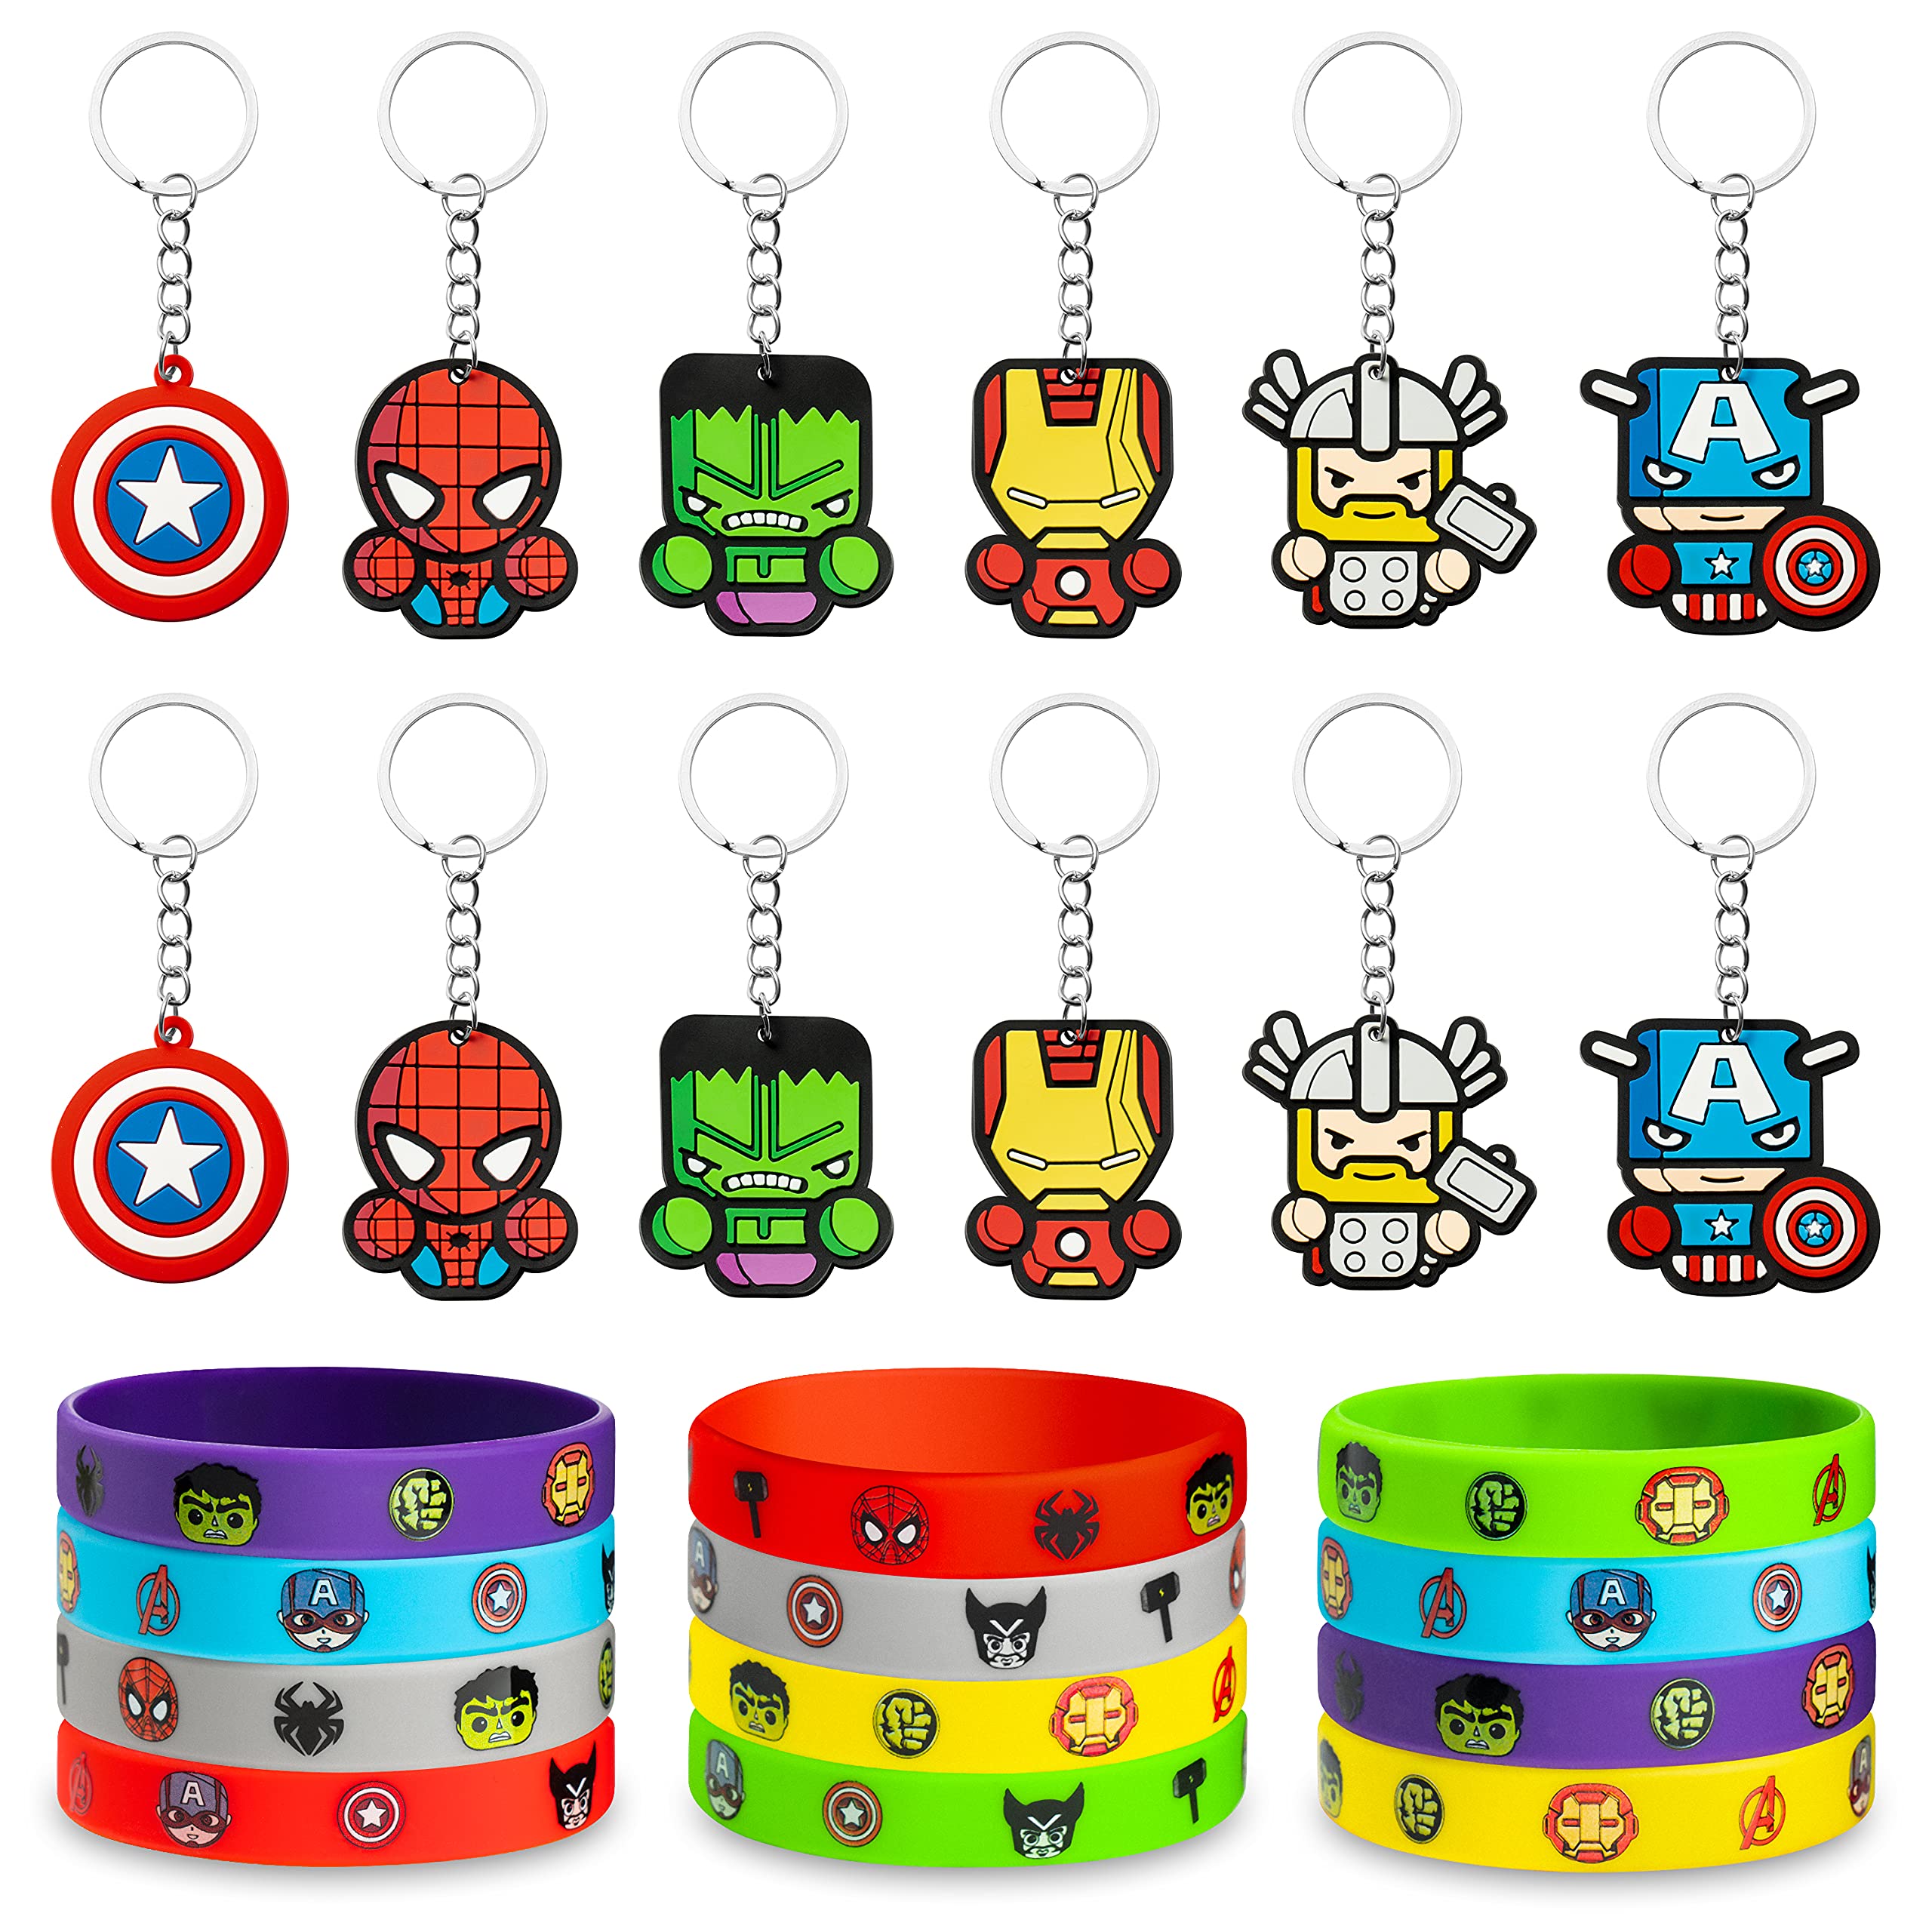 6sisc 24Pcs Superhero Bracelets & Keychains Marvel Avengers Themed Party Favors Set for Carnival Game Prizes Colored Silicone Wristbands Movie Character Rubber Key Chains Supplies for Birthday Party